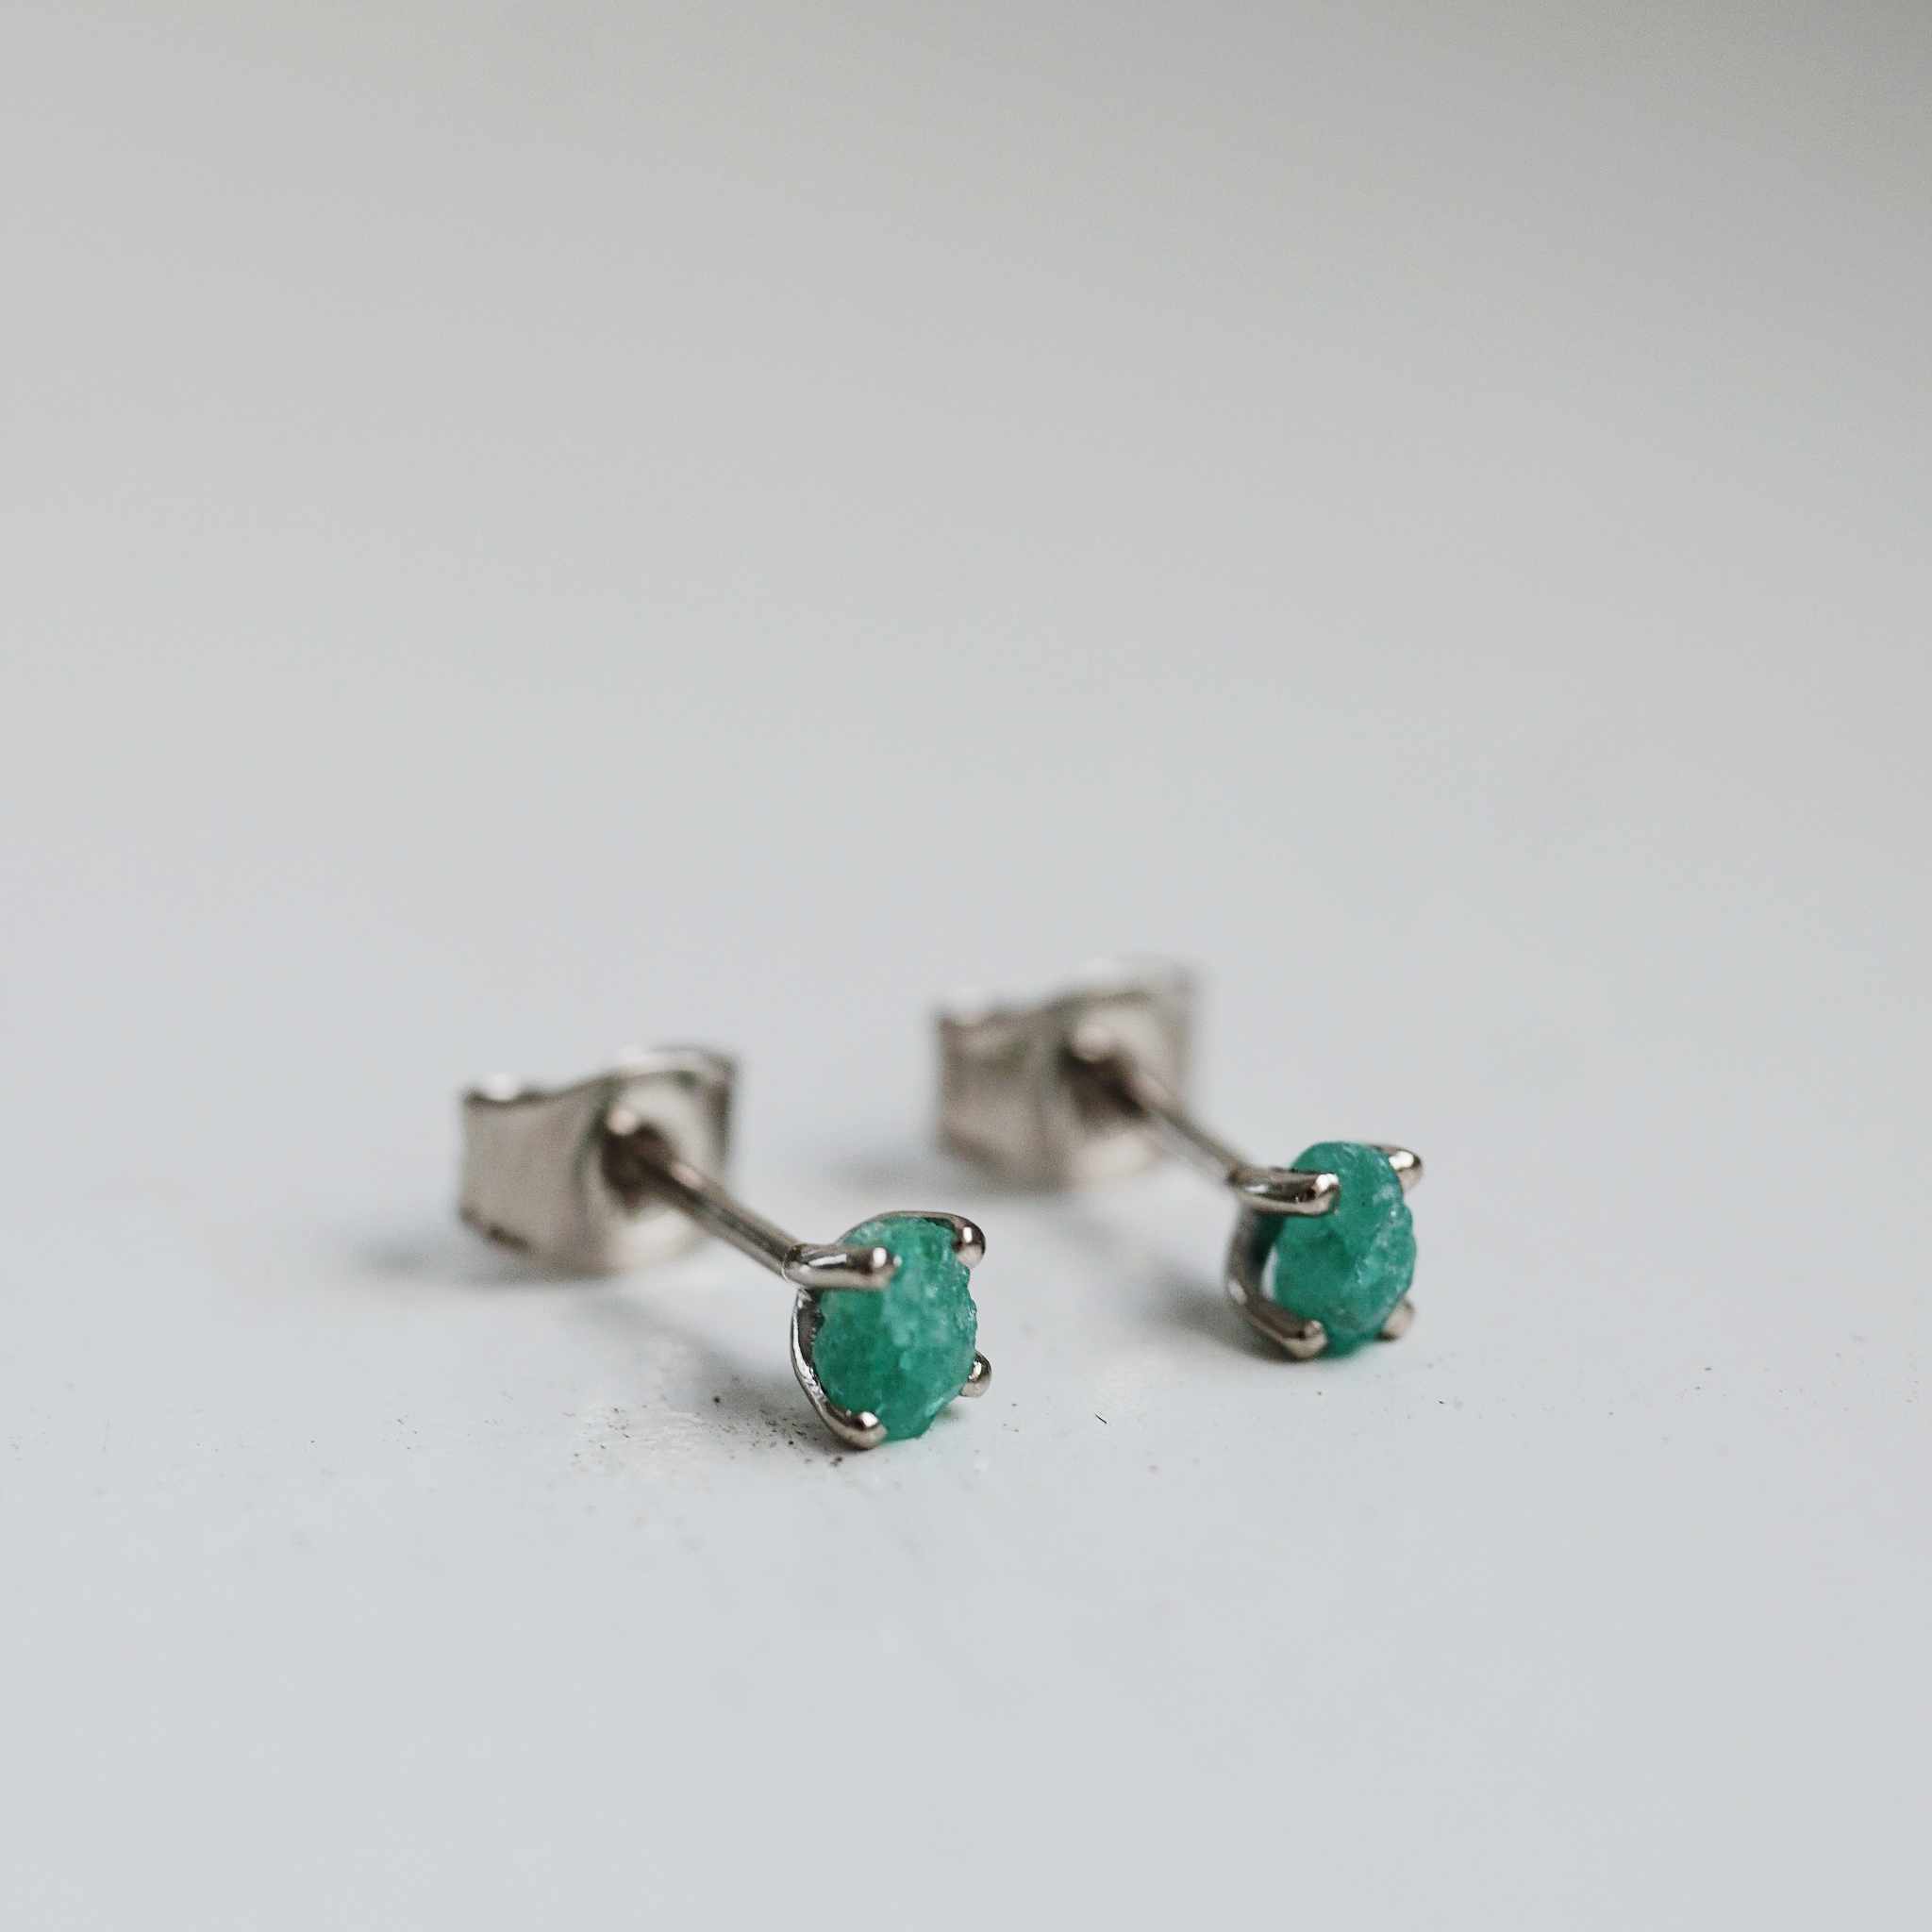 "Raw" earrings in white gold with raw emeralds